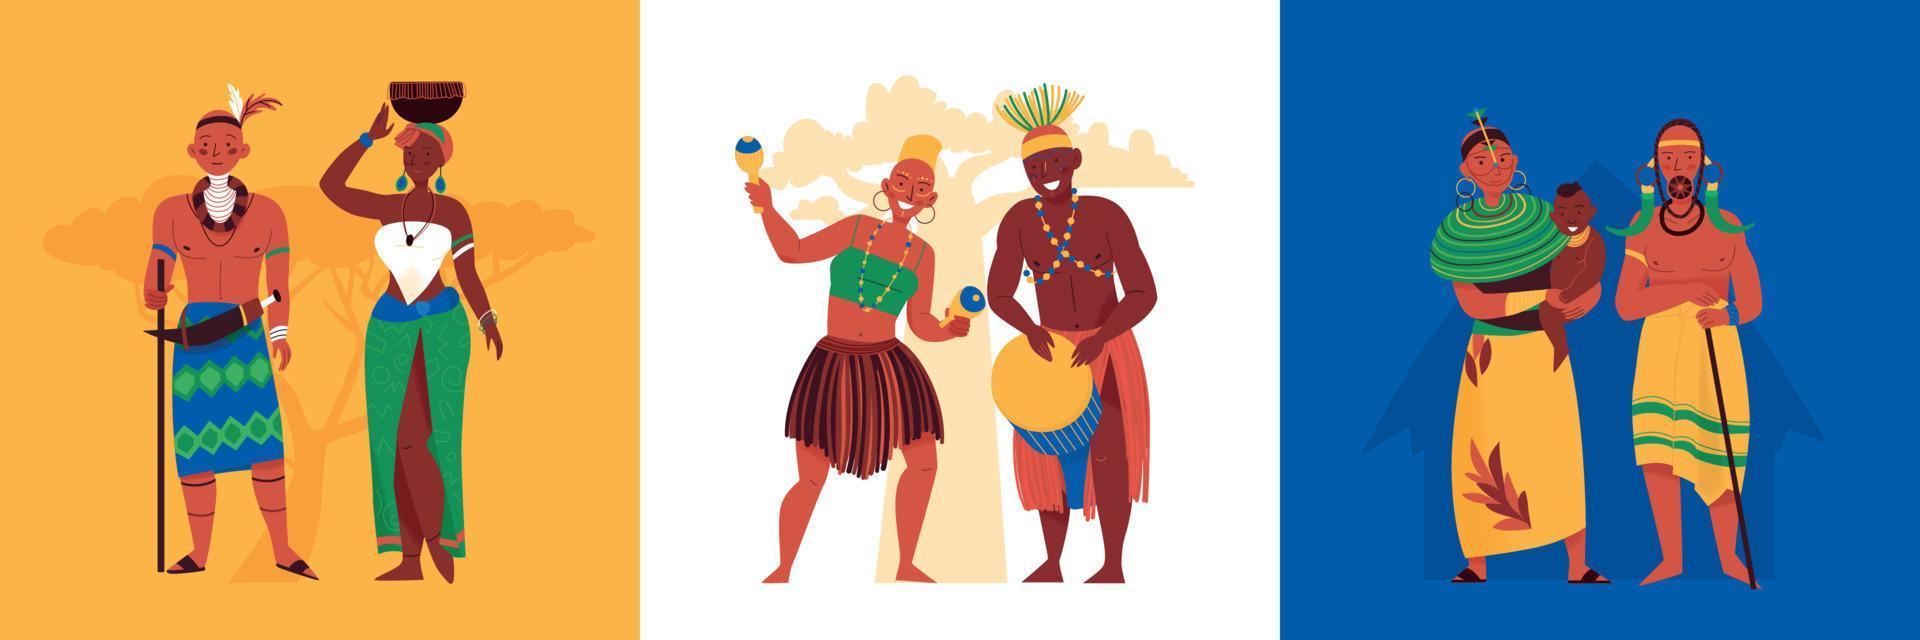 African People Design Concept vector